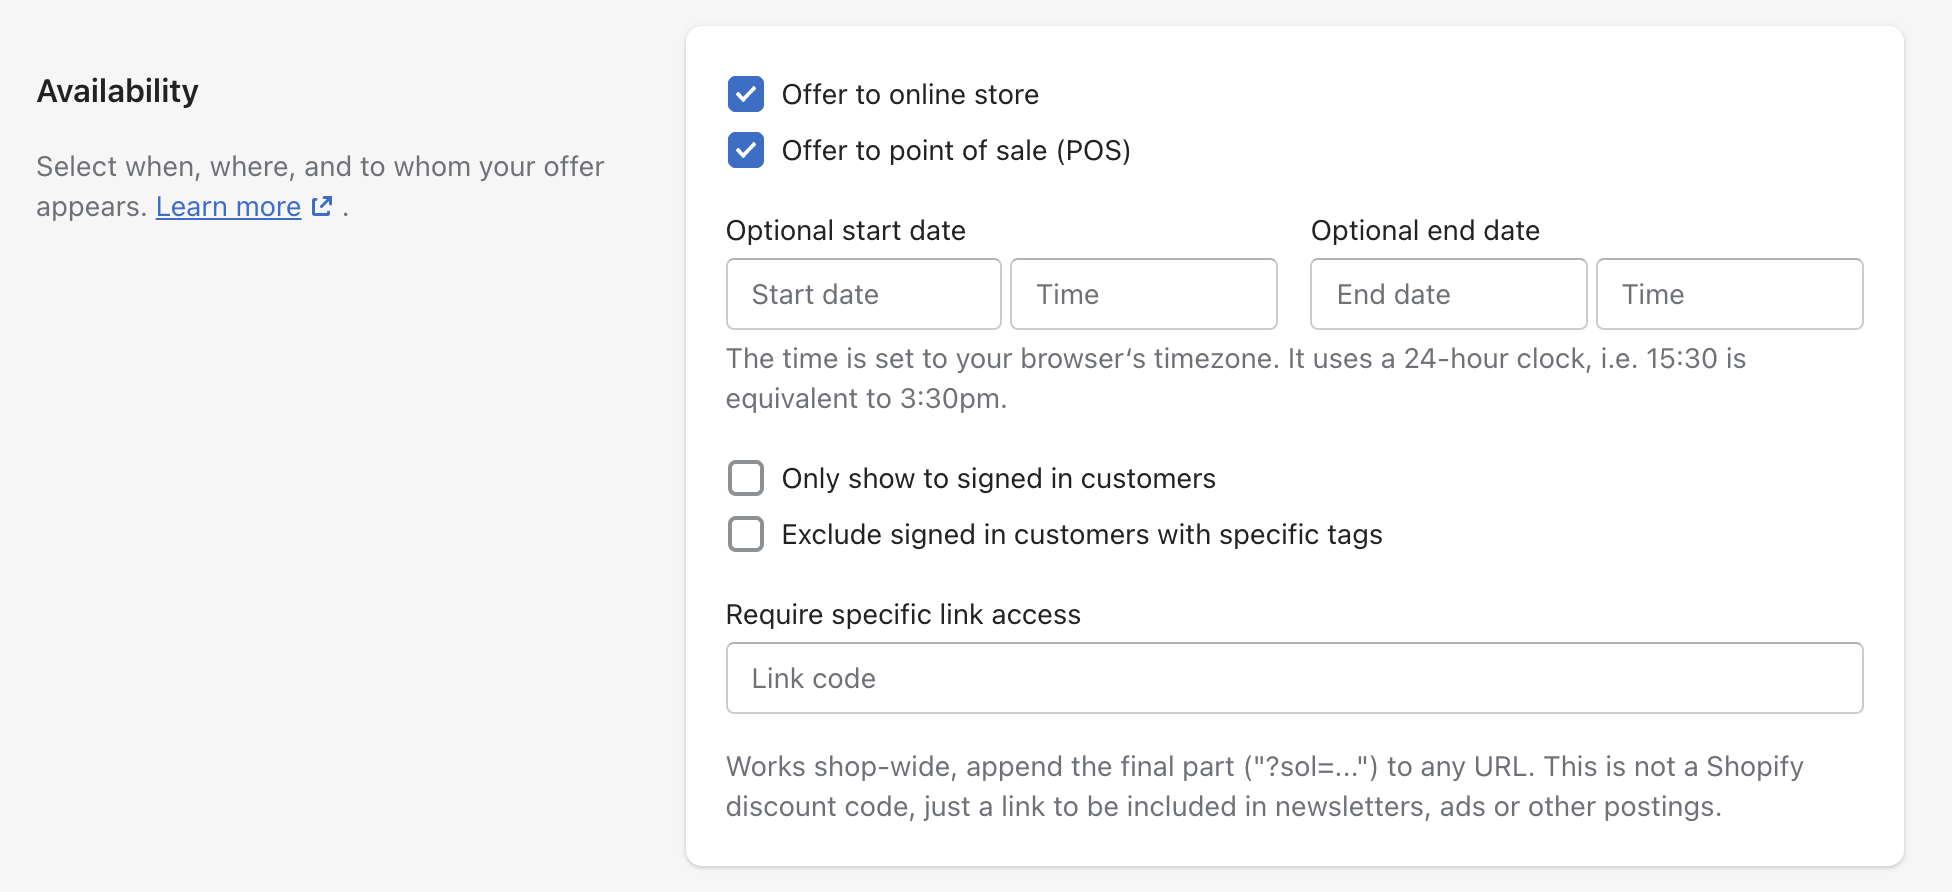 Availability settings to select a sales channel, schedule an offer, manage offer availability for customer accounts, and set unique offer links.